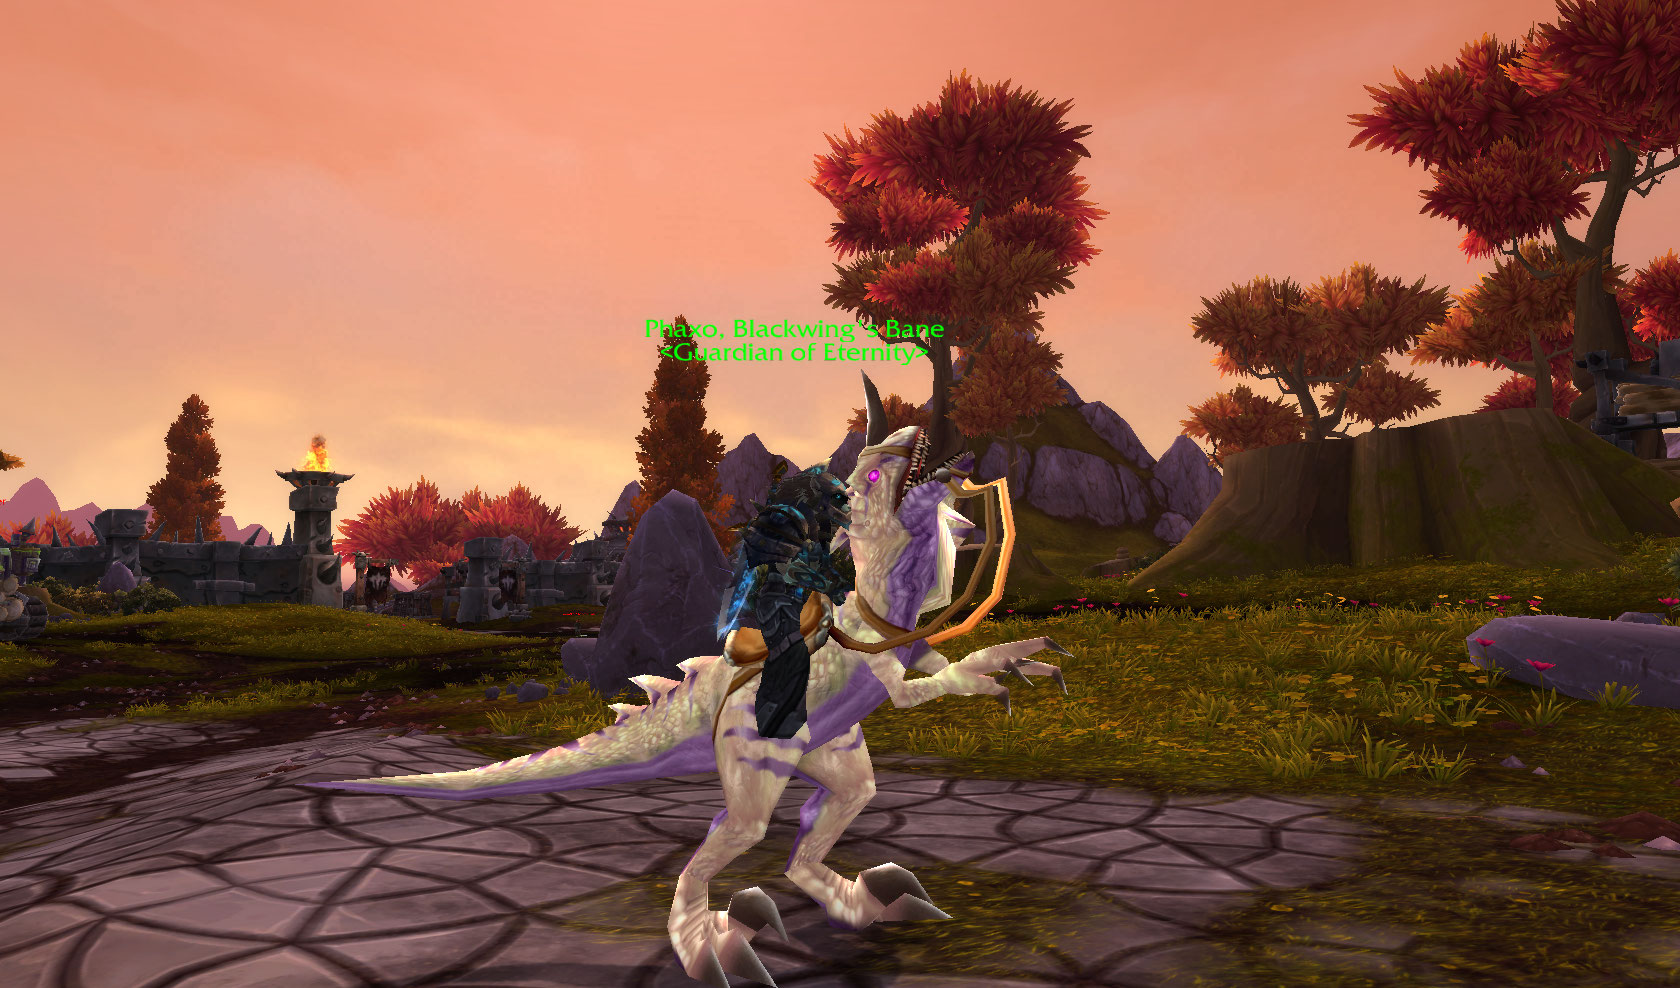 Bone-white primal raptor. the date on getting this mount - 4/16/13